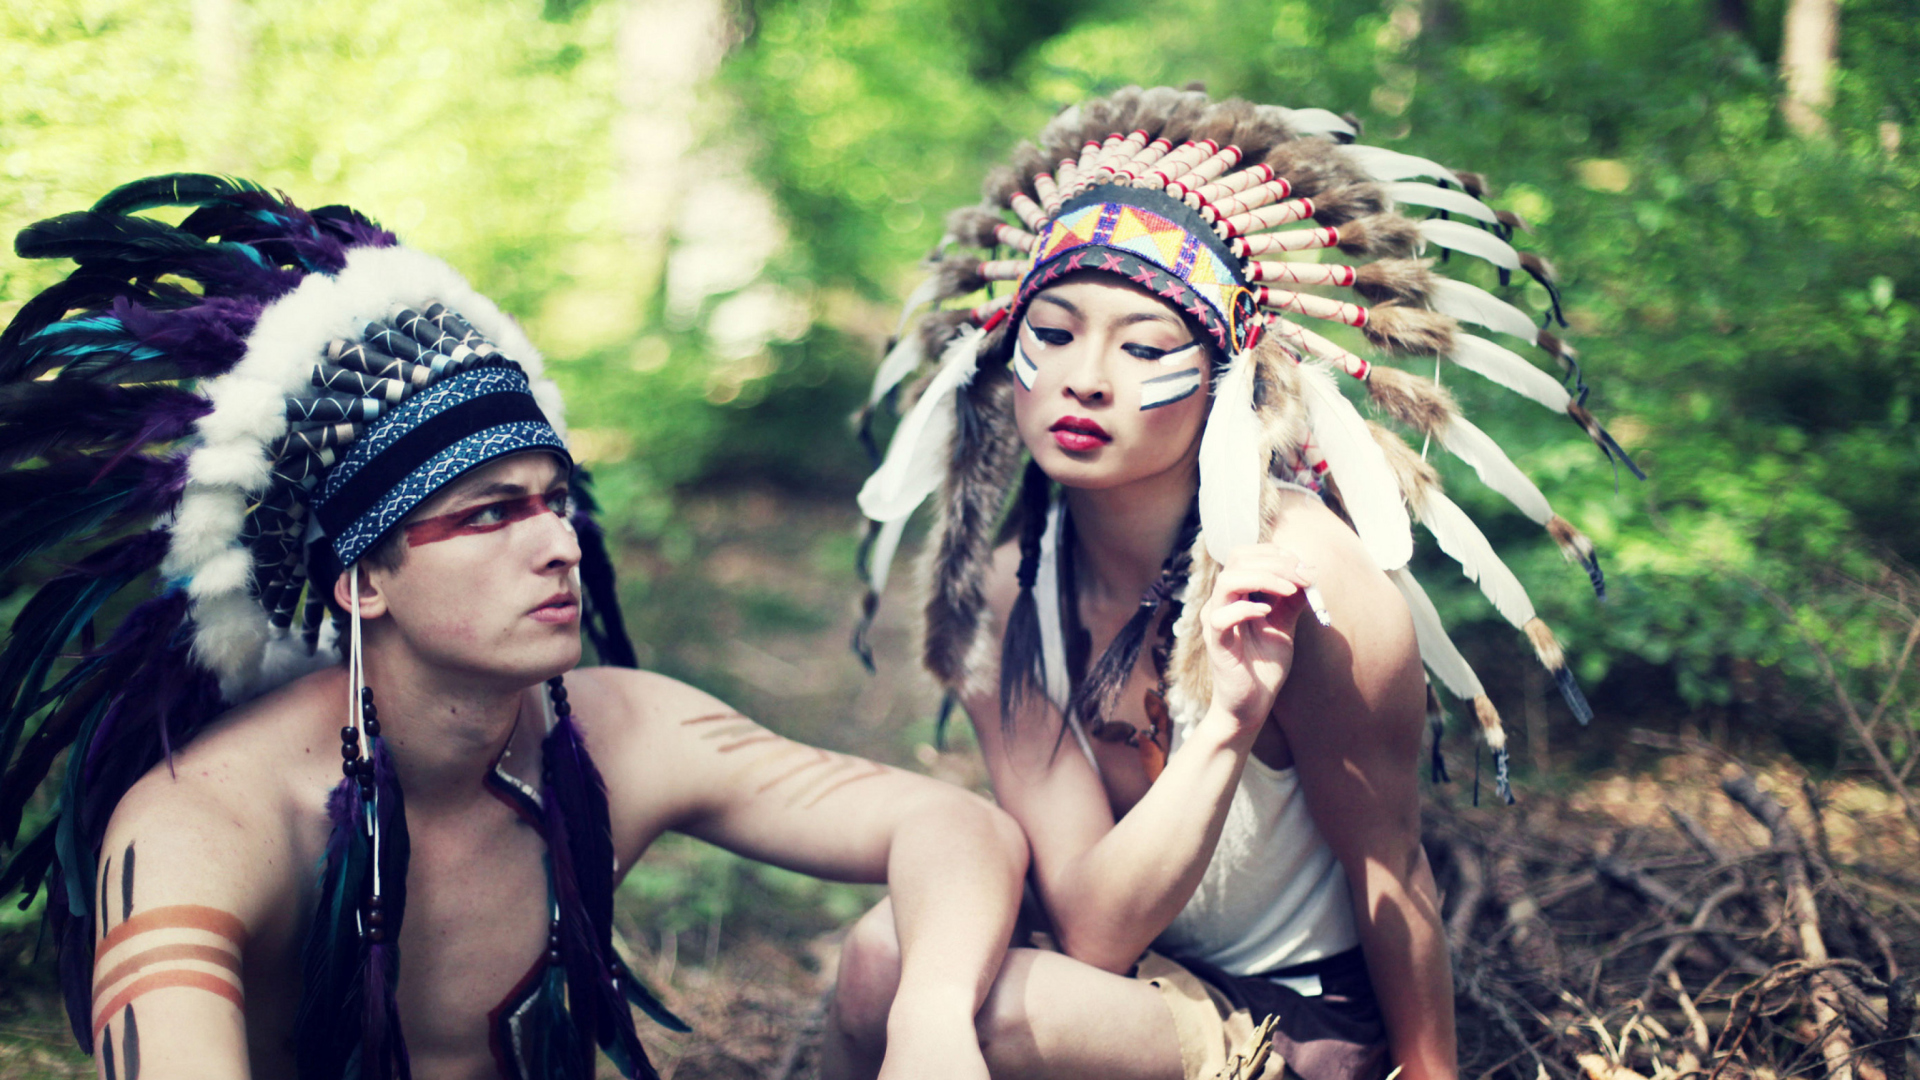 Indian Feather Hat wallpaper 1920x1080